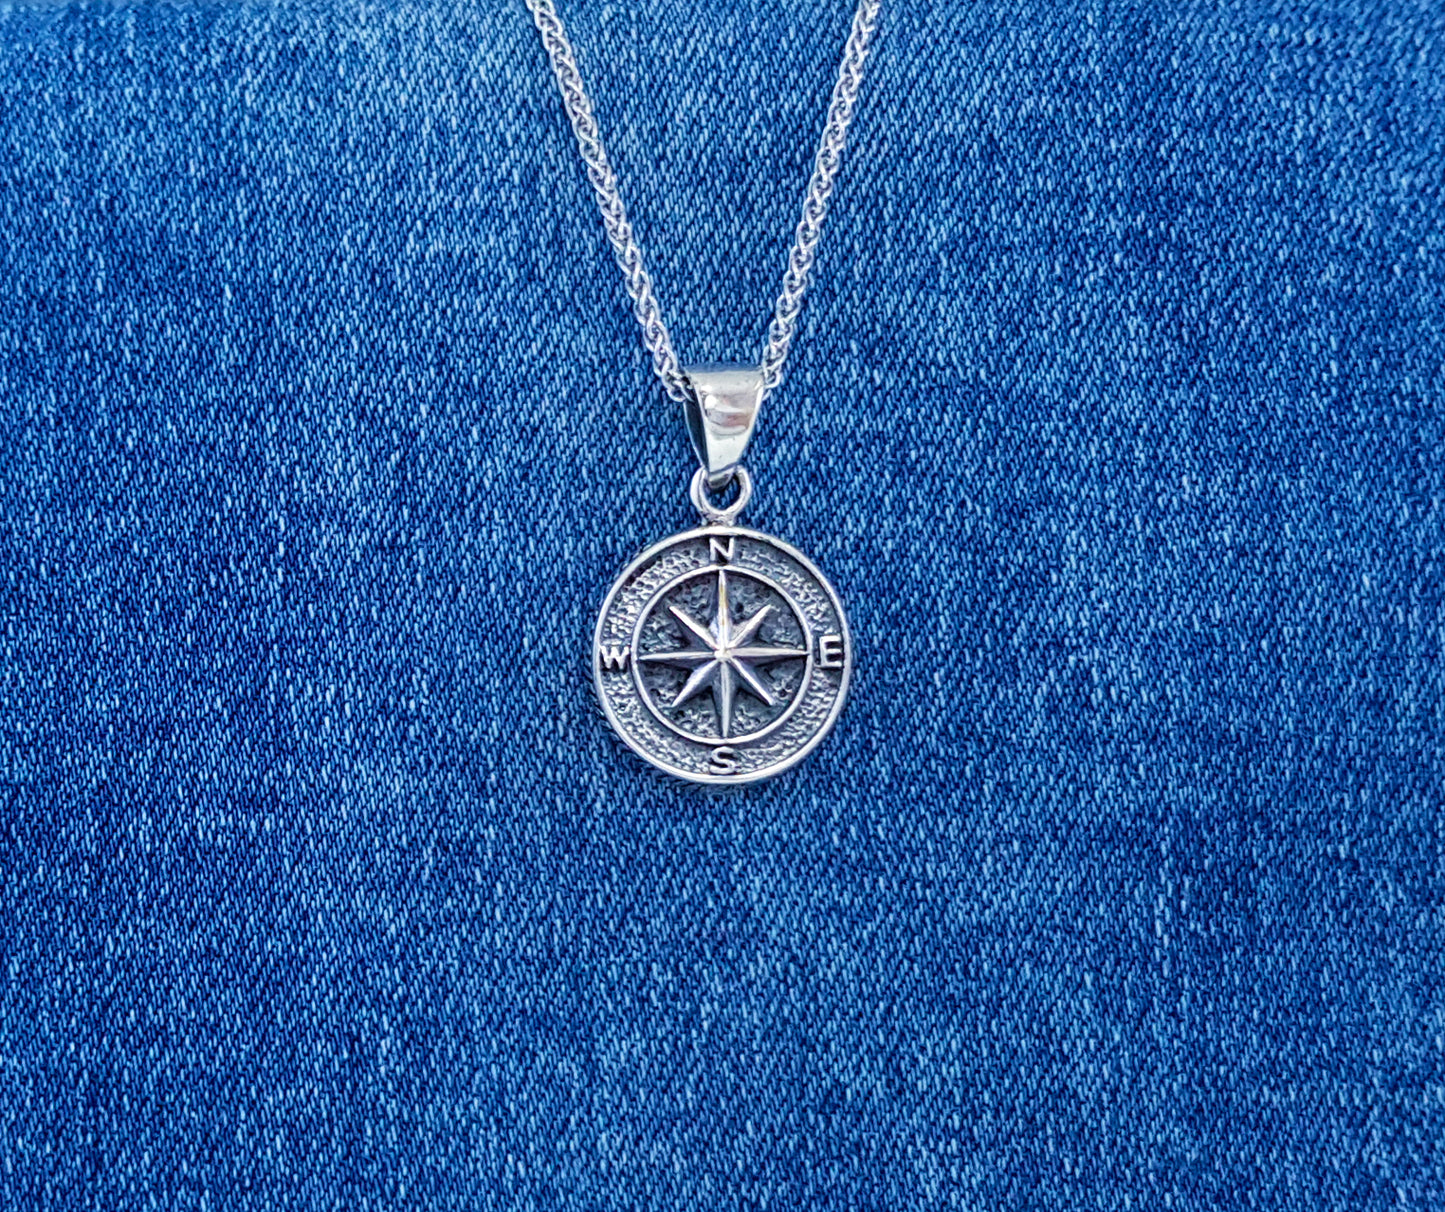 Sterling Silver Compass Pendant.